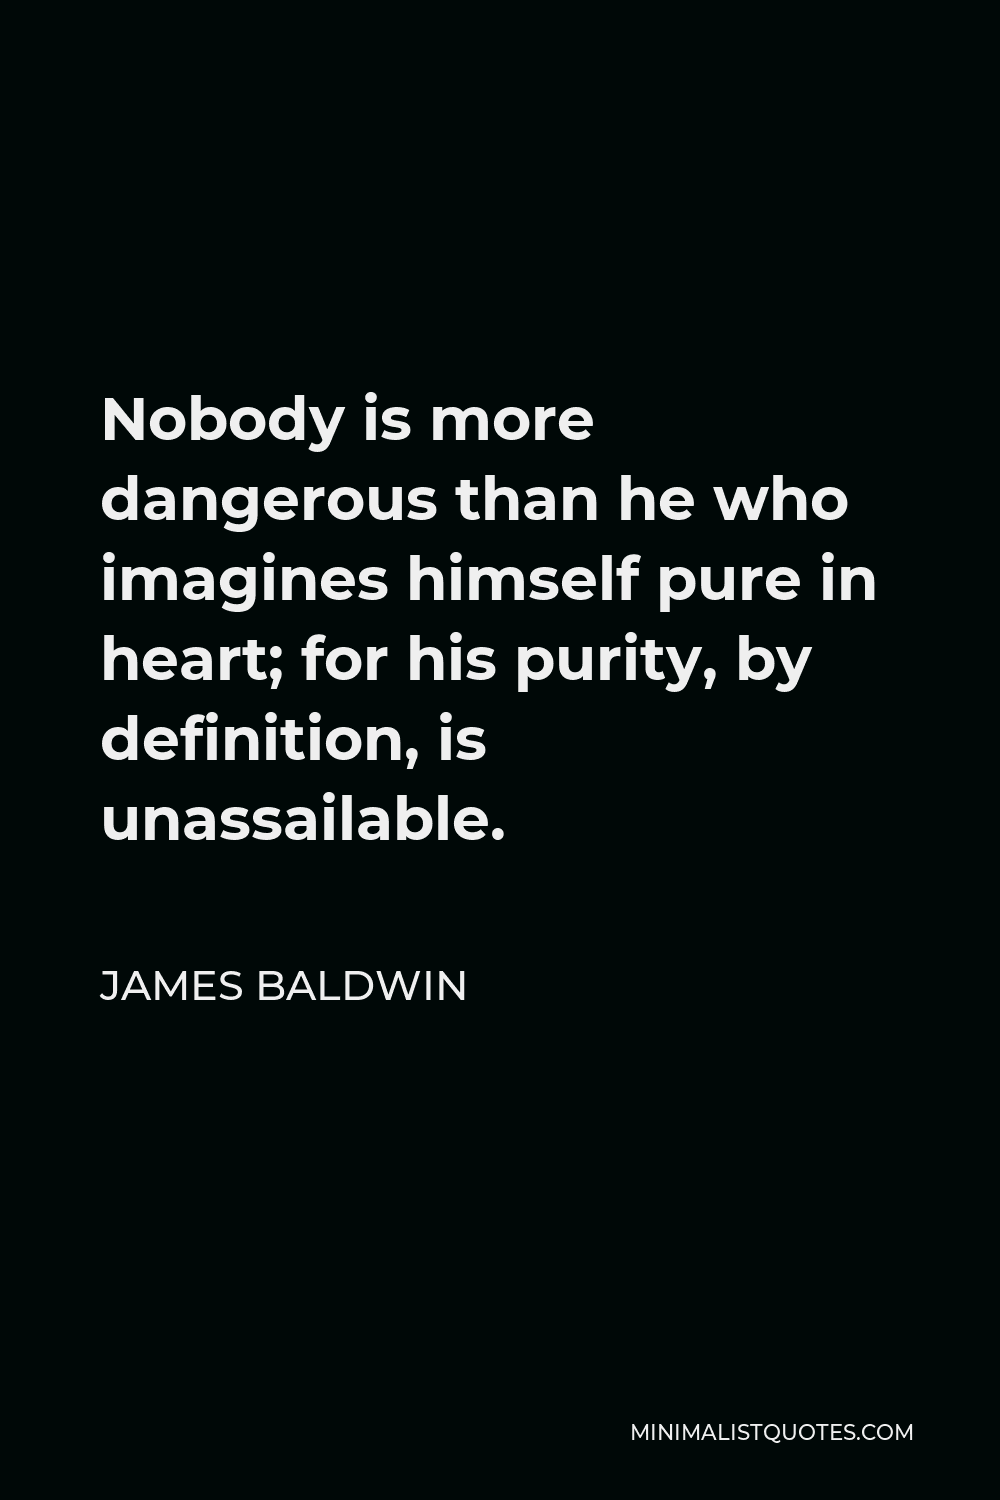 James Baldwin Quote - Nobody is more dangerous than he who imagines himself pure in heart; for his purity, by definition, is unassailable.